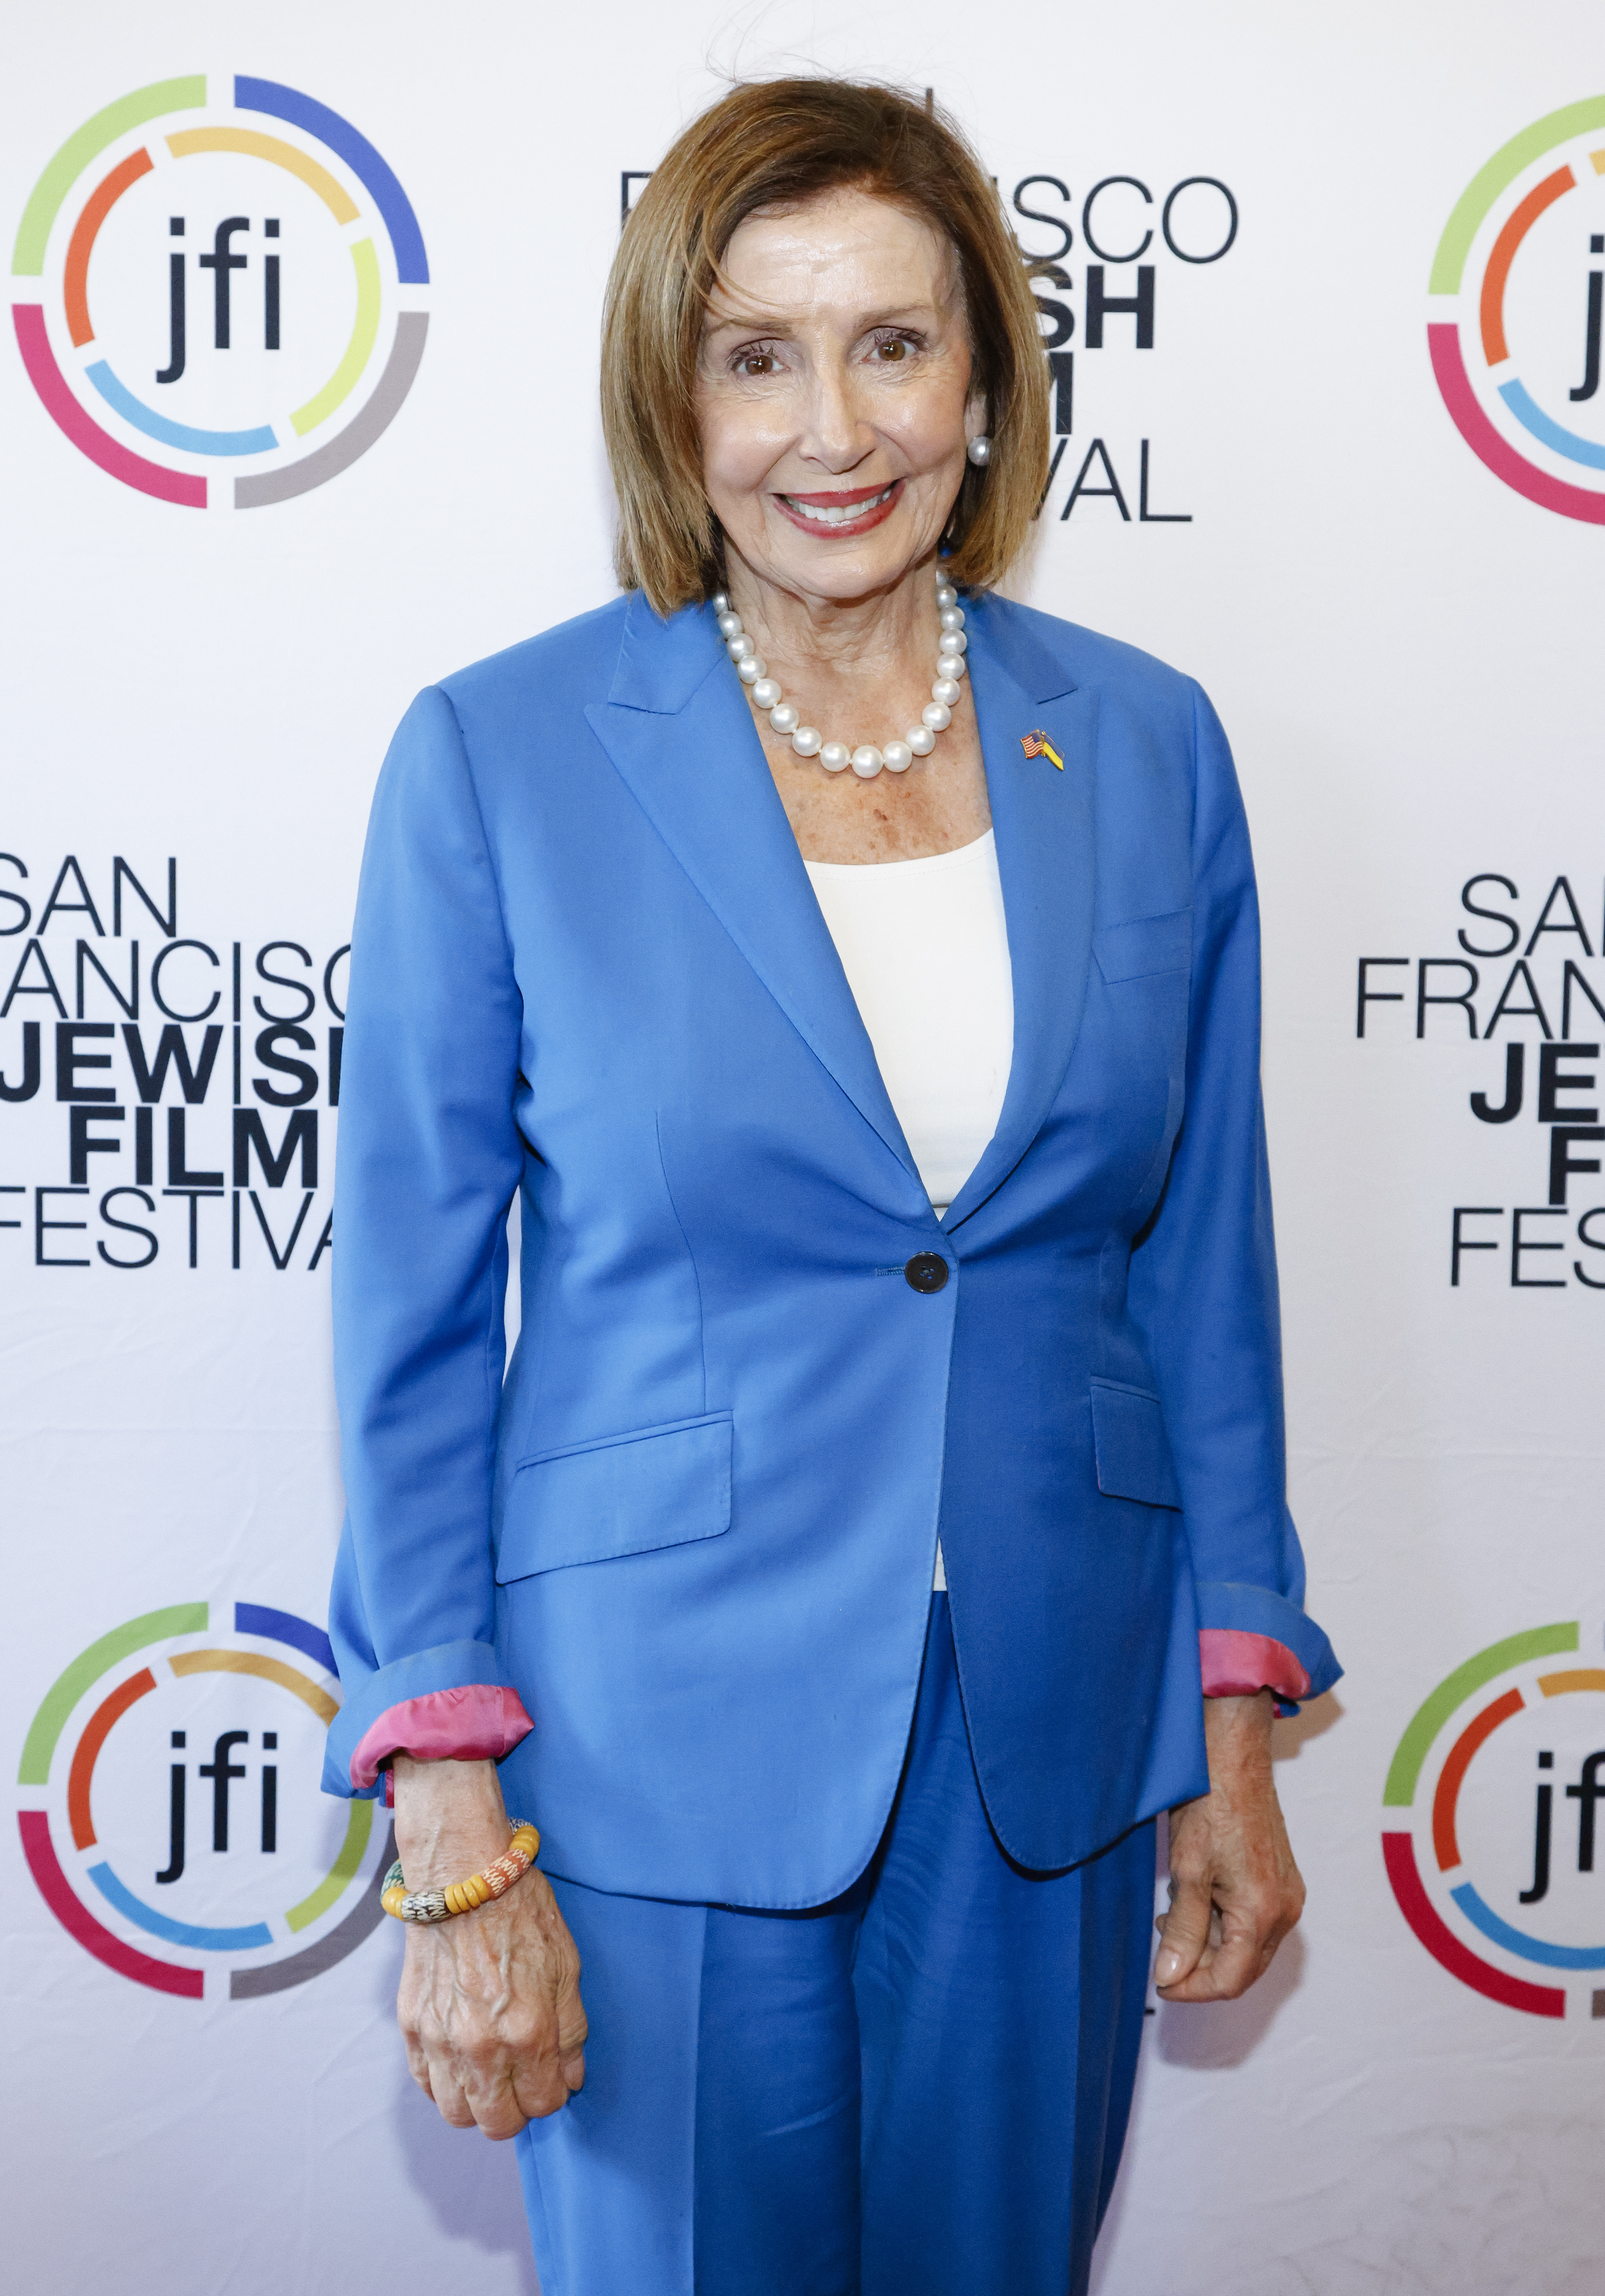 Nancy Pelosi attends the closing night premiere of "Bella!" at the 2023 San Francisco Jewish Film Festival at the Castro Theatre on July 30, 2023, in San Francisco, California. | Source: Getty Images